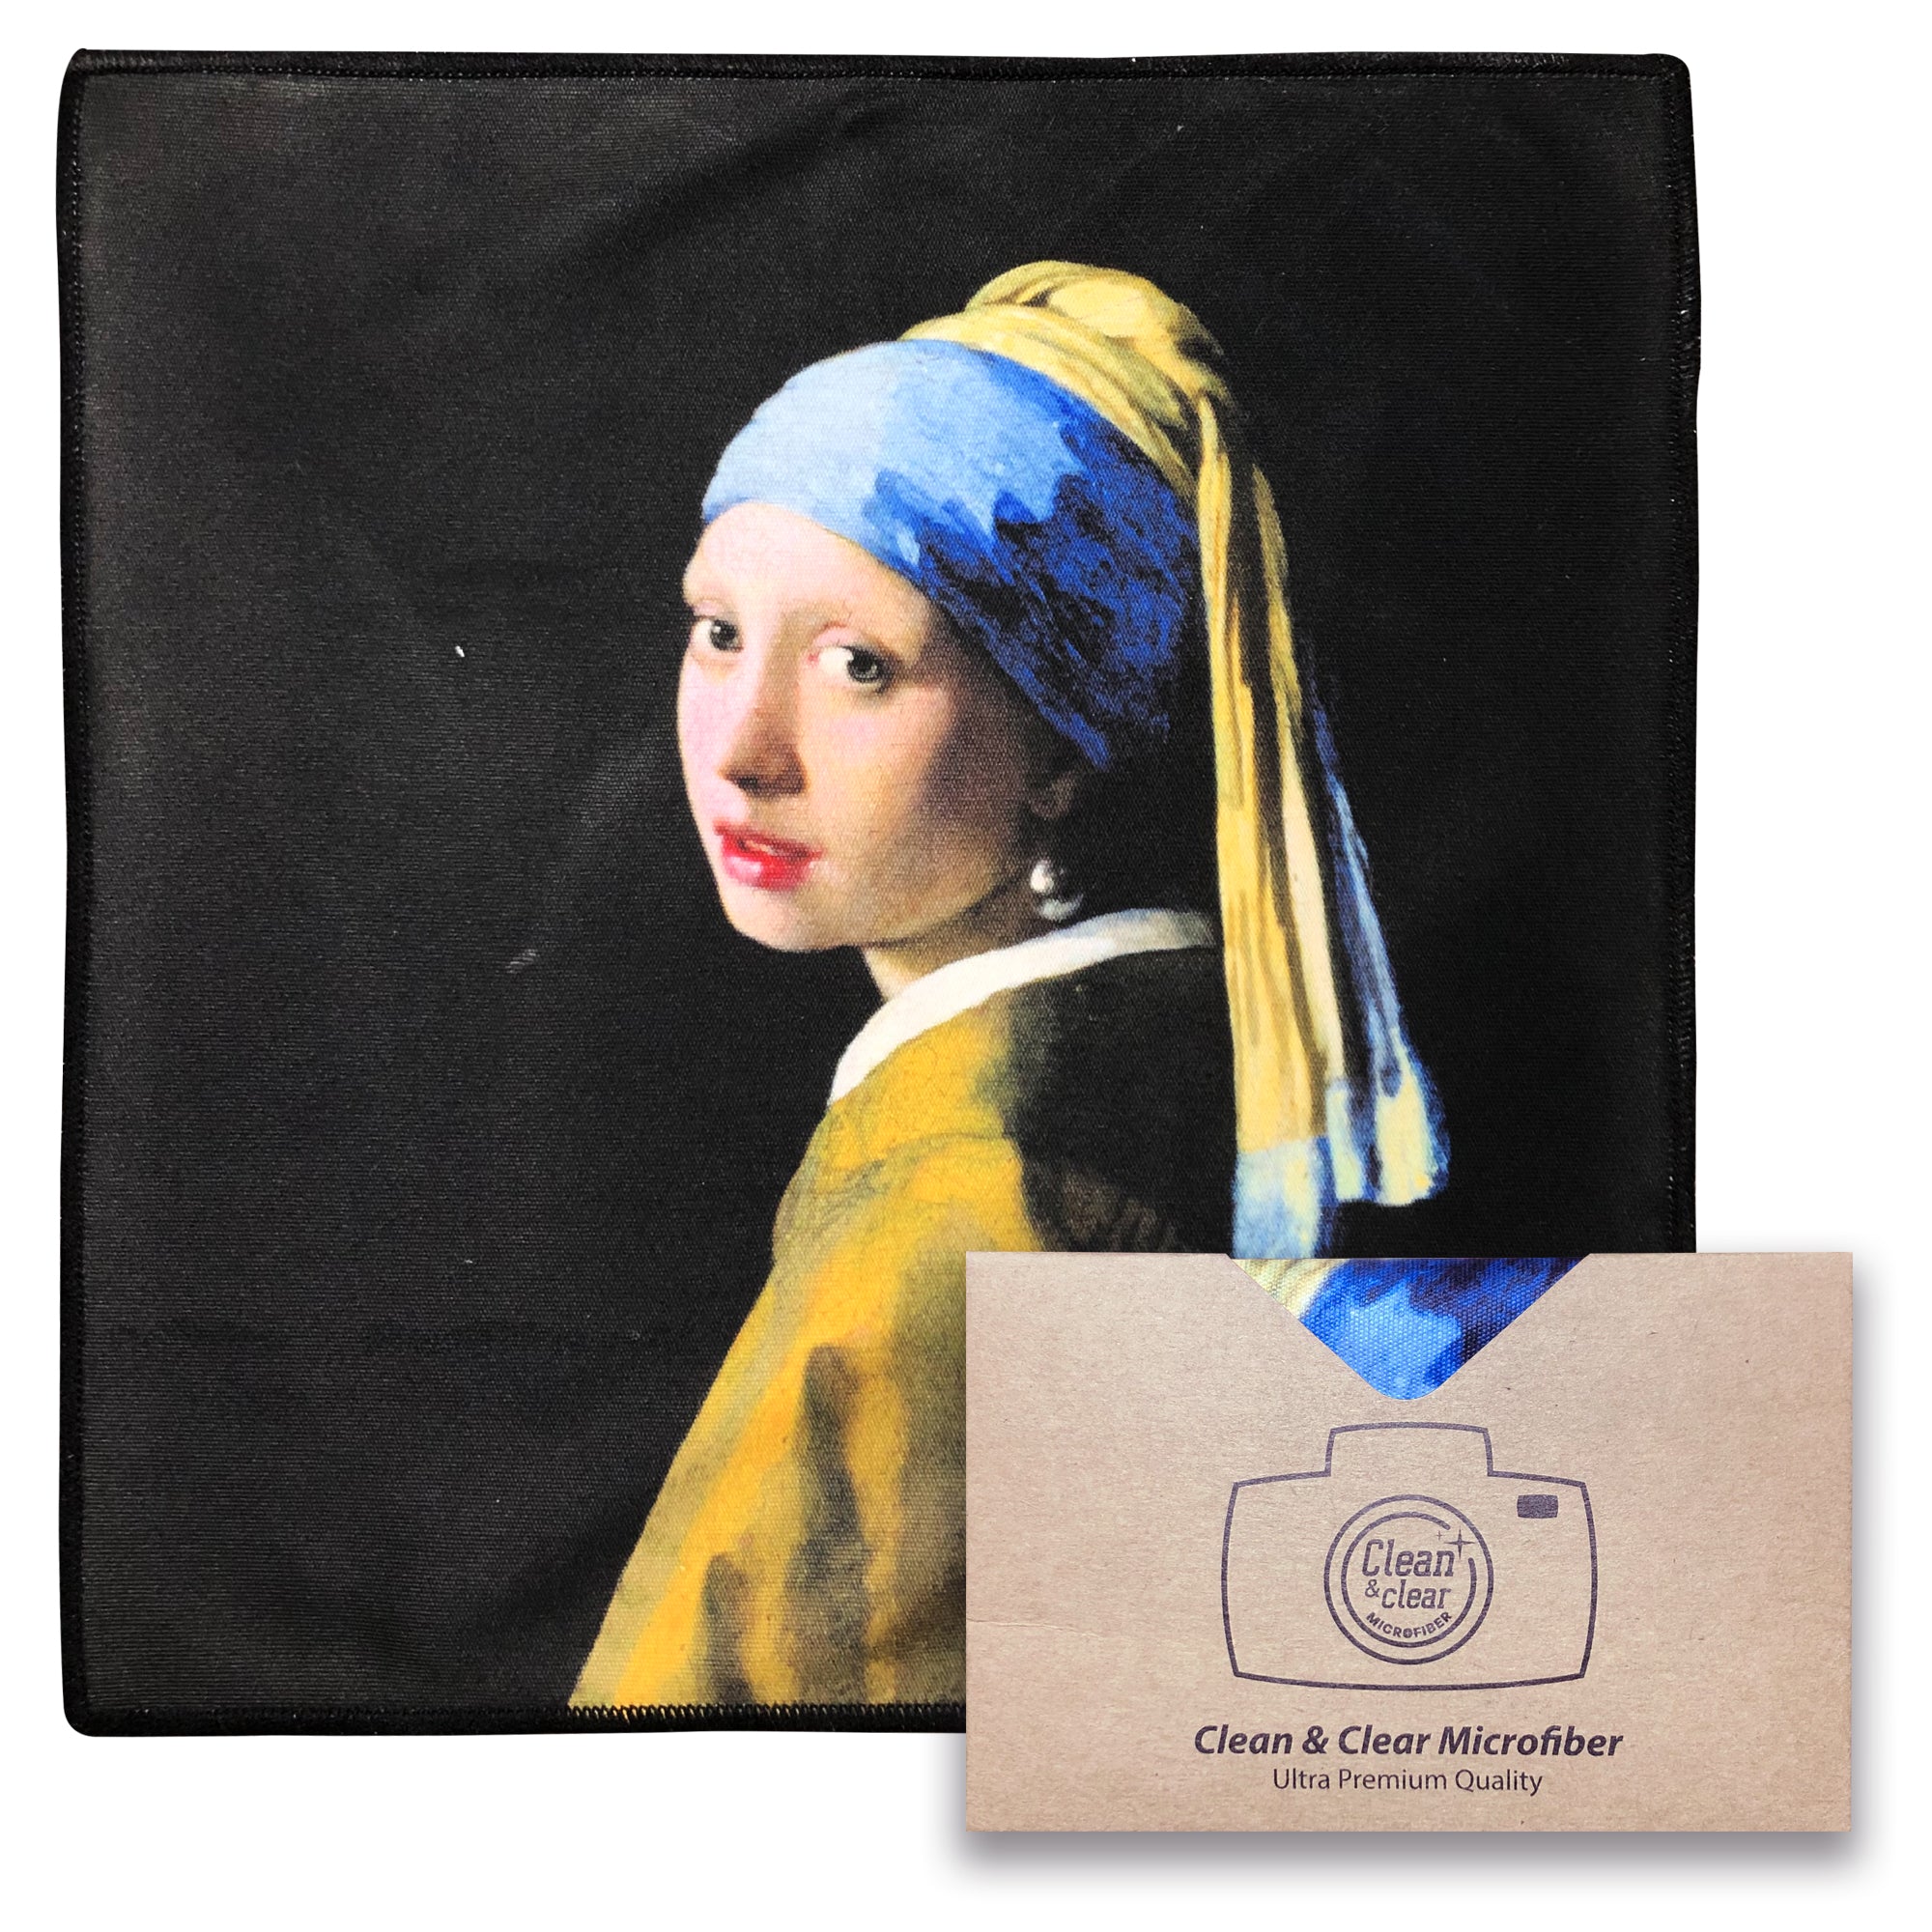 [10pack set] World Best Classic Art Collection - Ultra Premium Quality Microfiber Cleaning Cloths (Best for Camera Lens, Glasses, Screens, and All Lens)